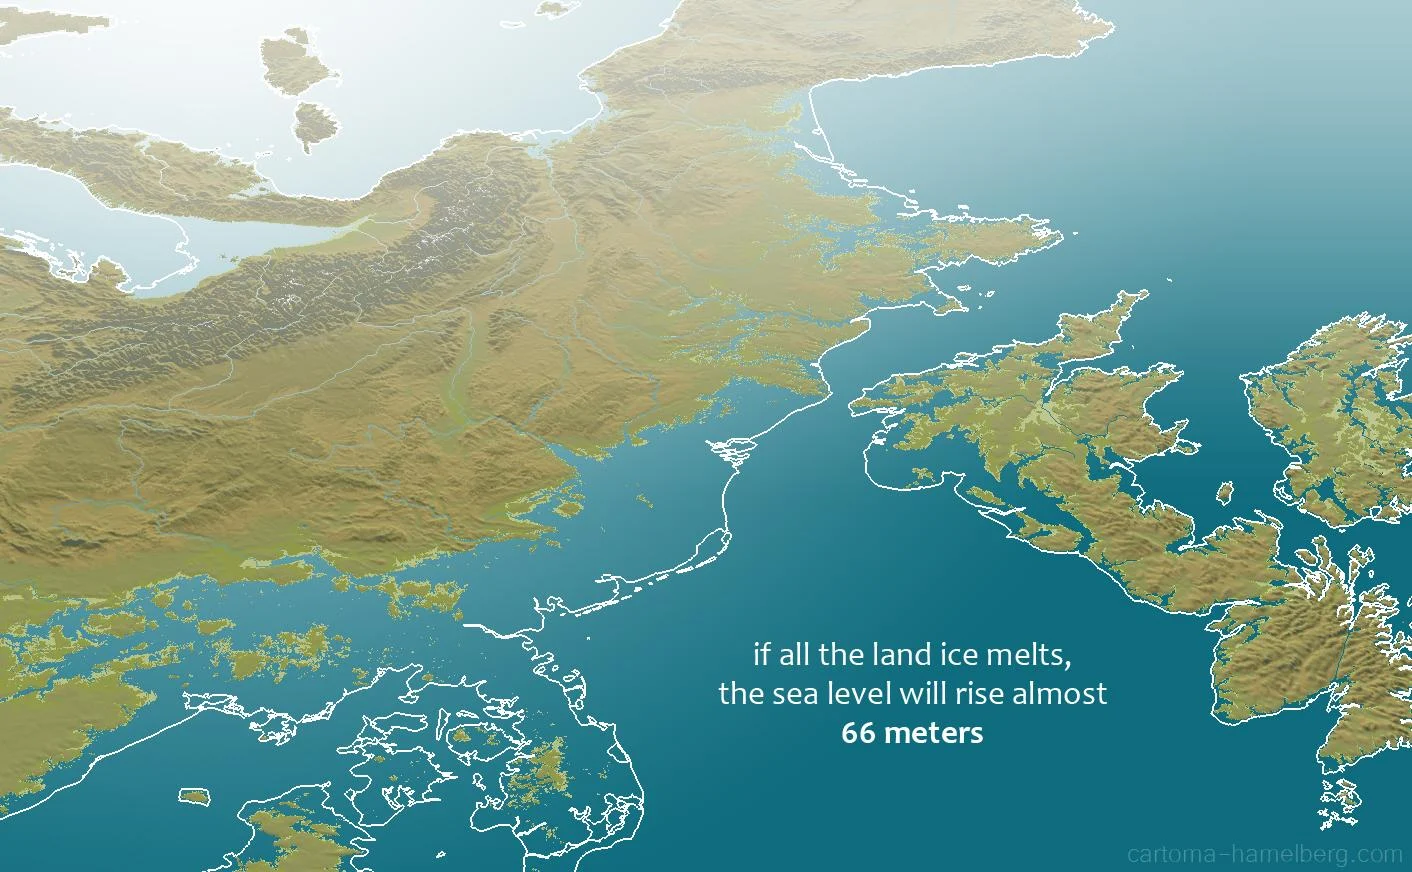 What happens if all the land ice melts? 